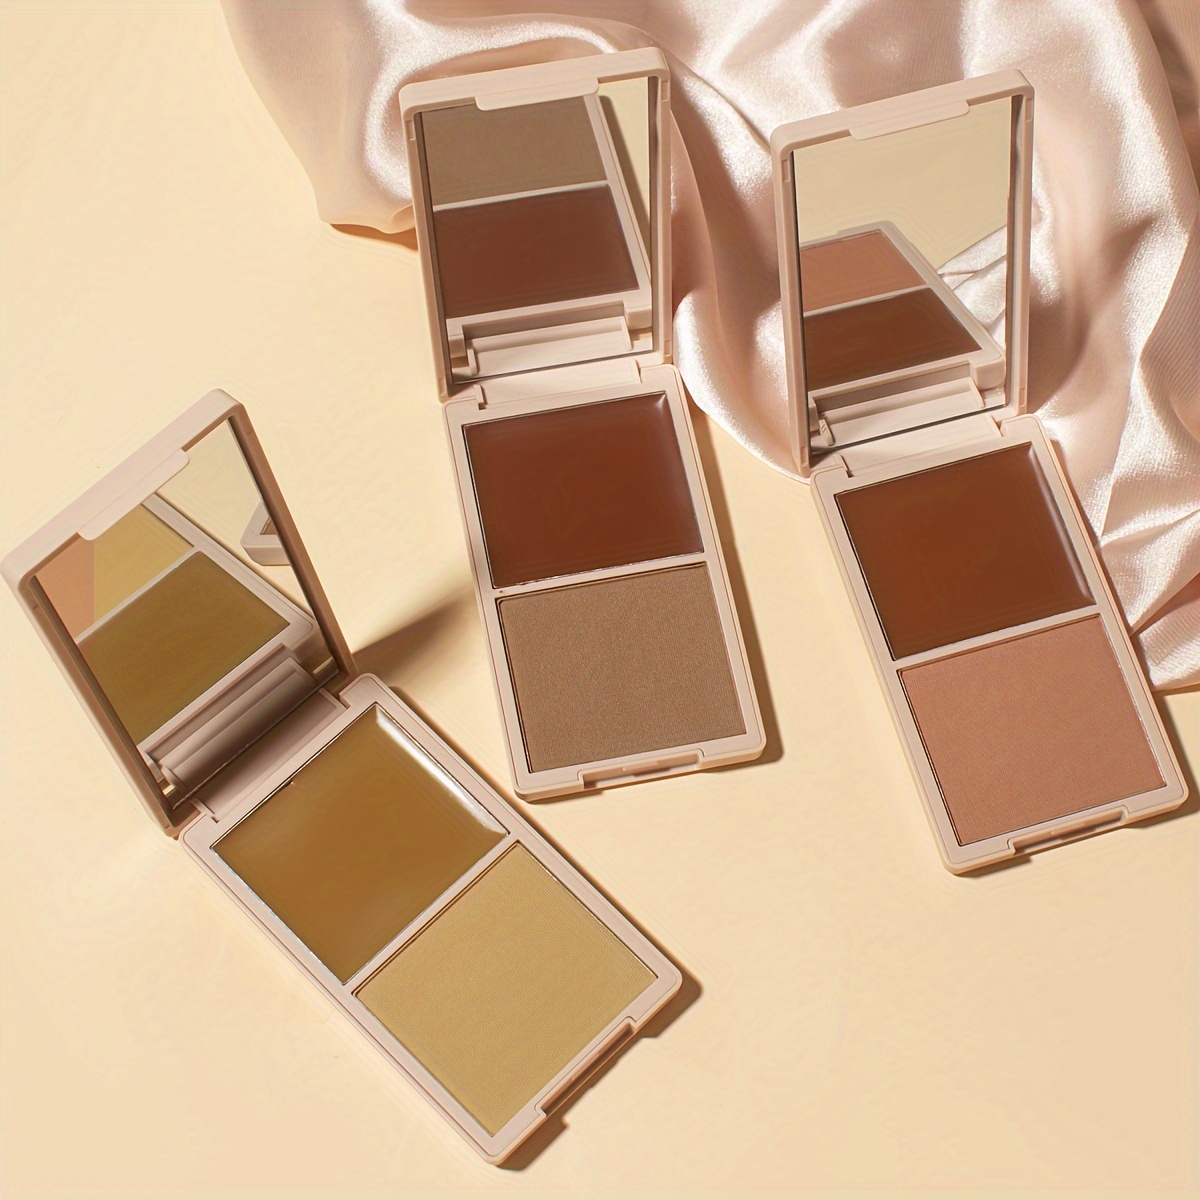 

2-in-1 Creamy Contouring Bronzer, High-pigment Formula, Long-lasting Sun-kissed Glow, With Mirror For Easy Application